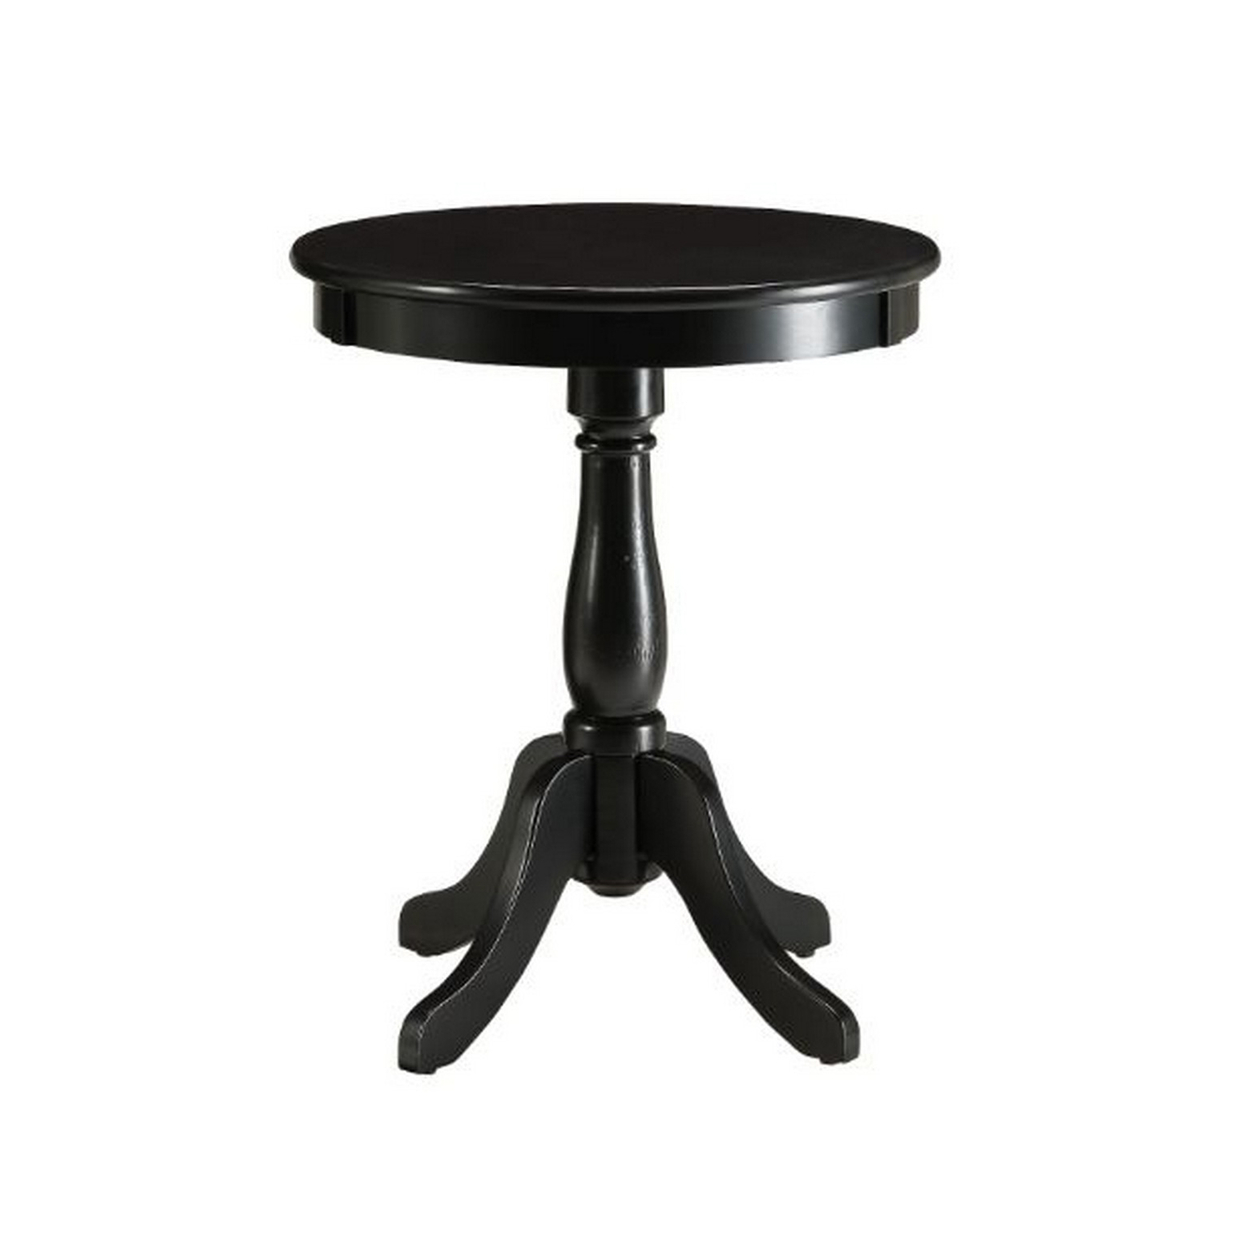 22 Inch Side End Table, Round Top, Pedestal Stand With Flared Legs, Black